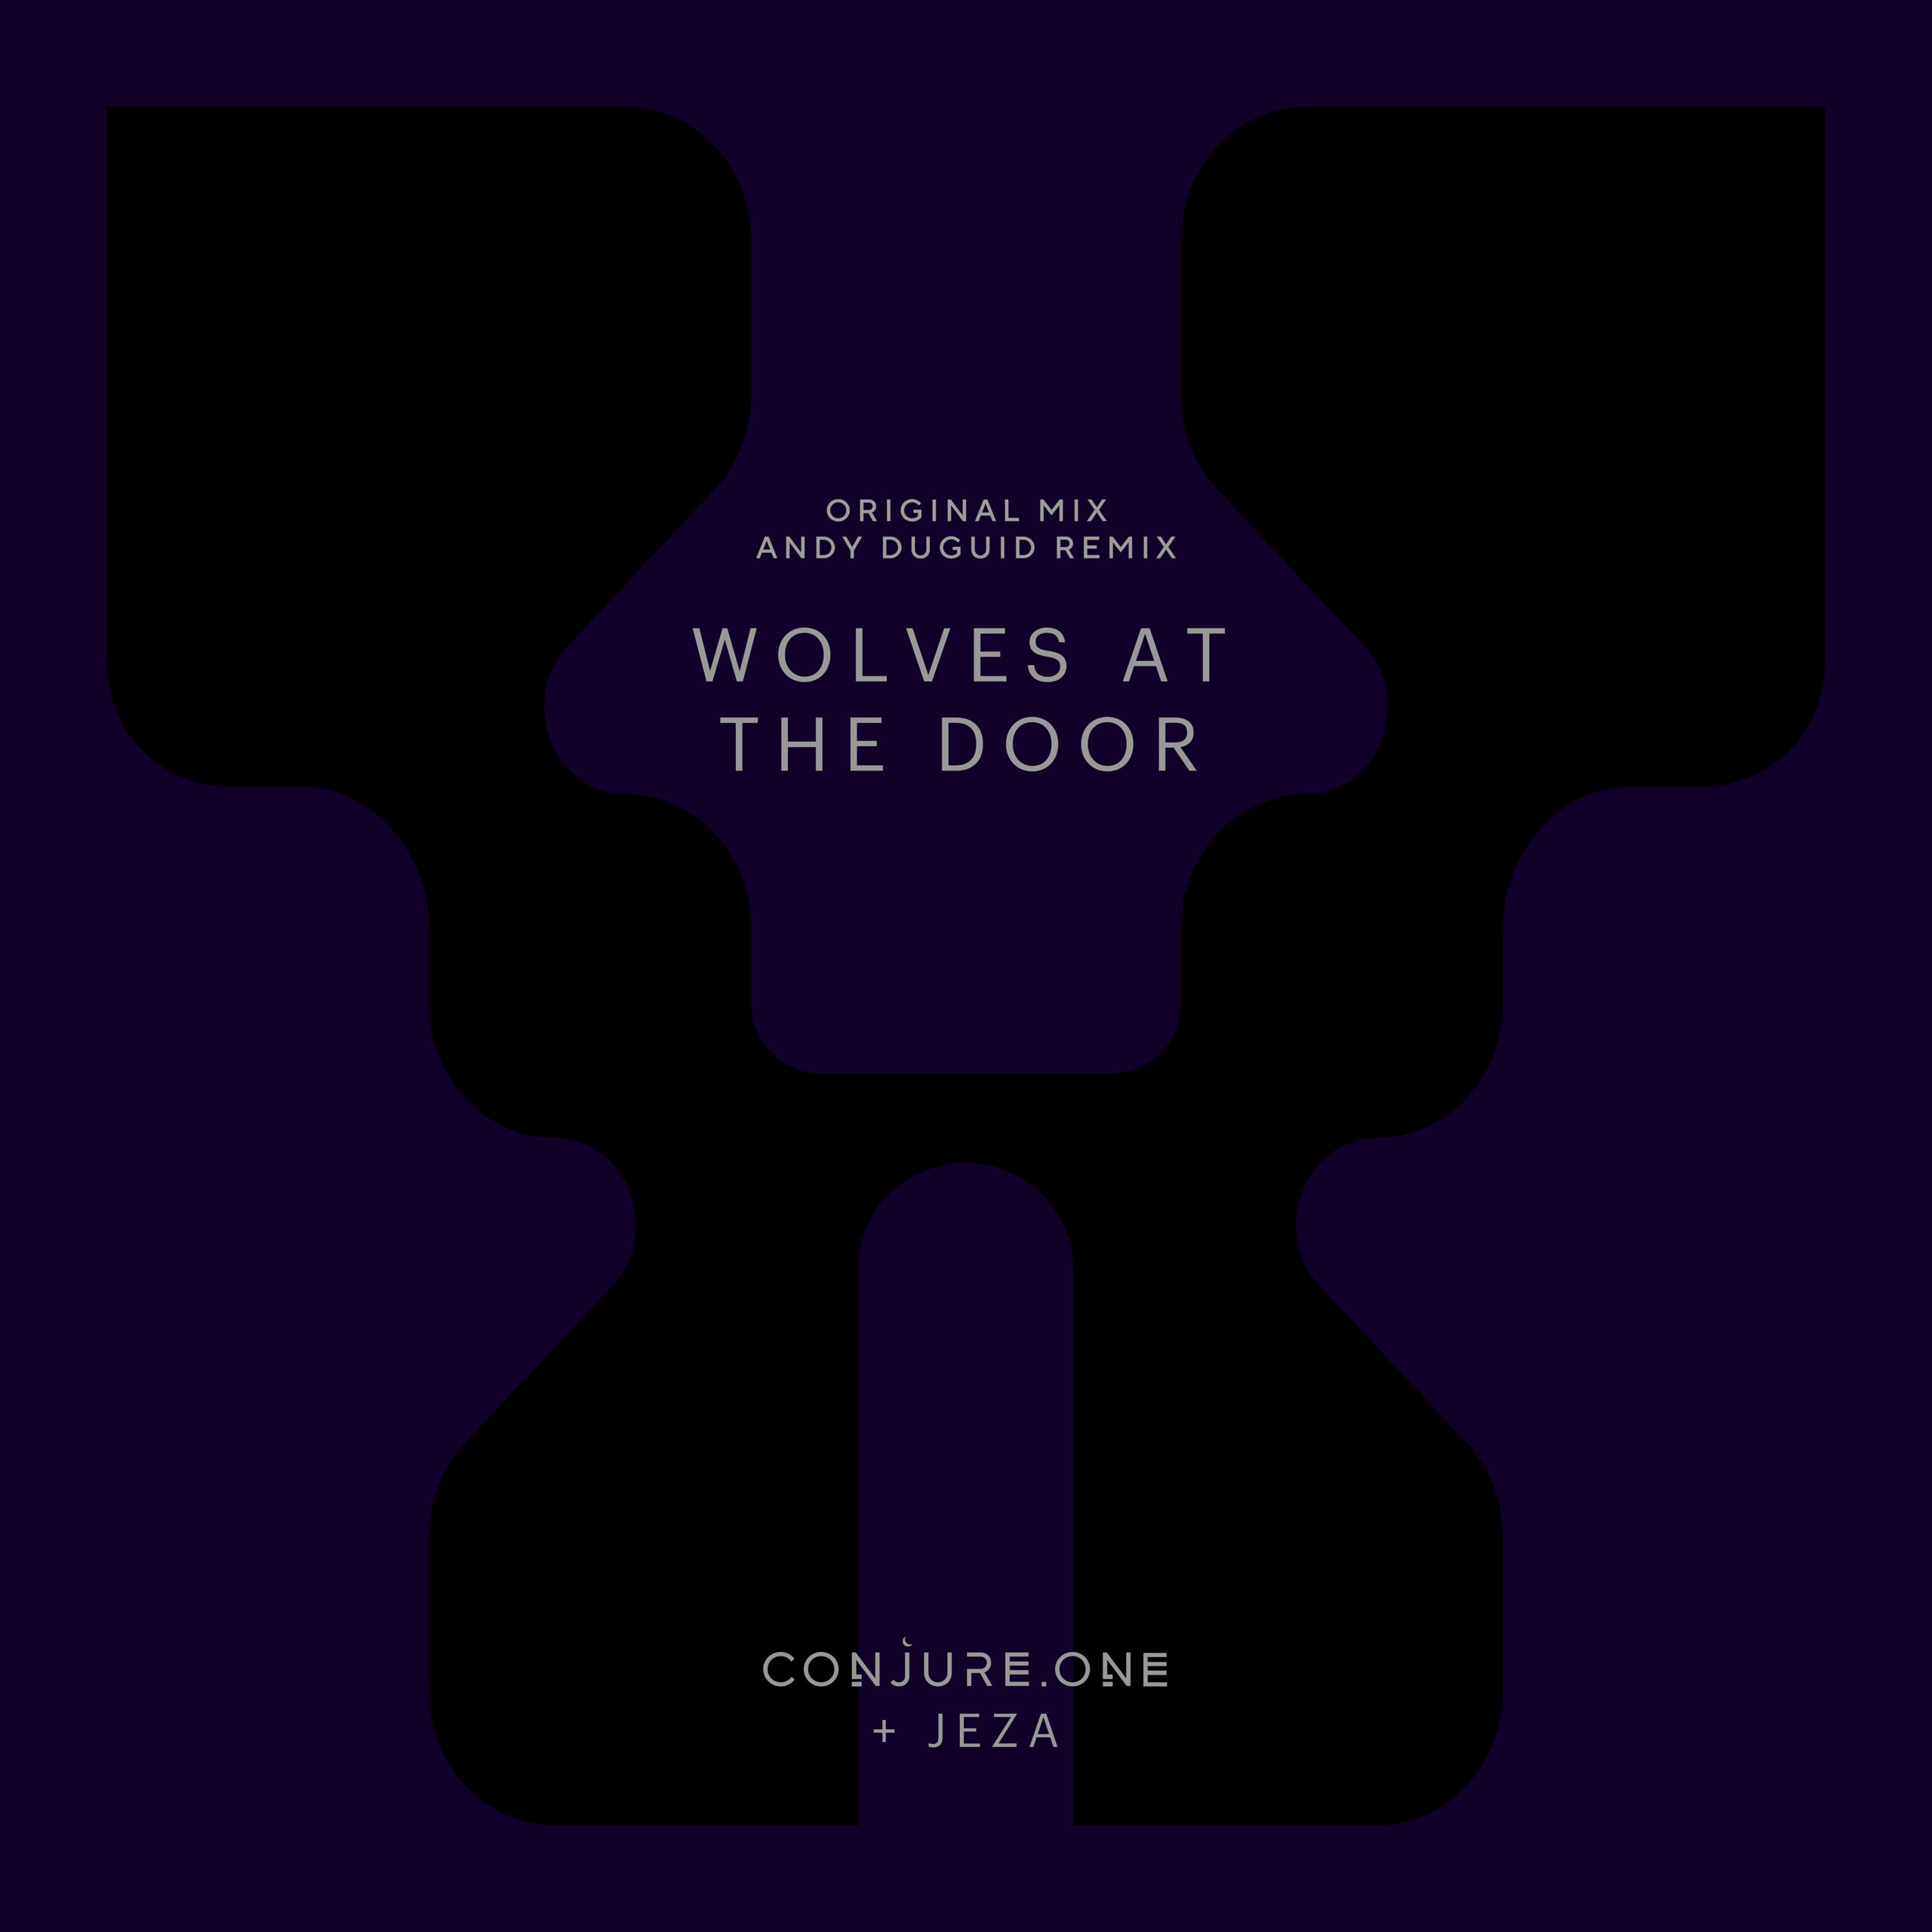 Conjure One and Jeza presents Wolves at the Door on Black Hole Recordings